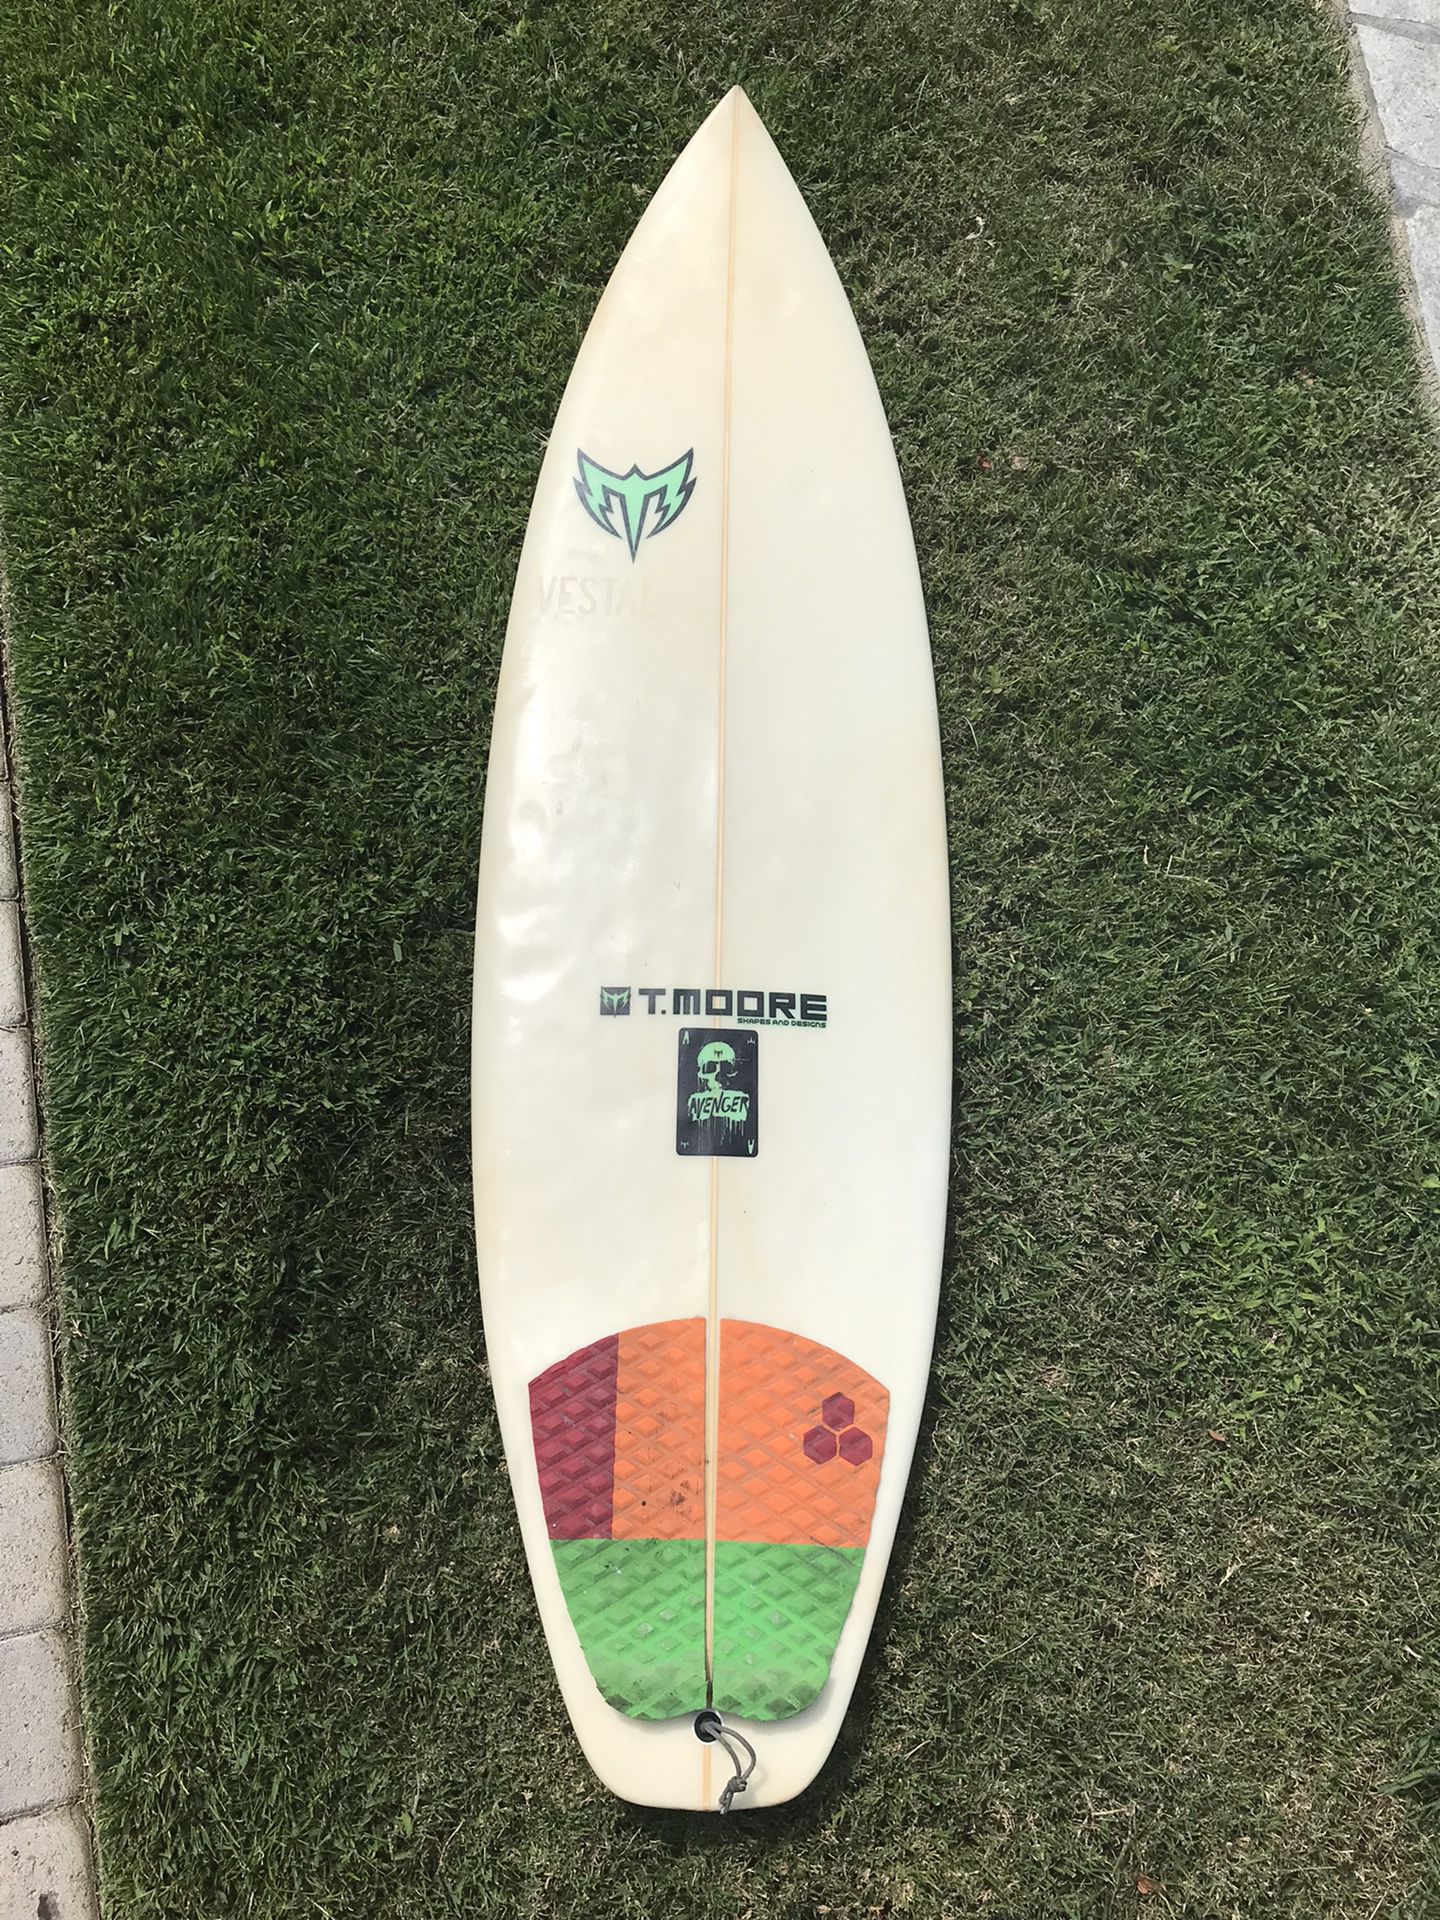 5’ 11” Thruster Short board. Surfboard Great Condition T. Moore Avenger